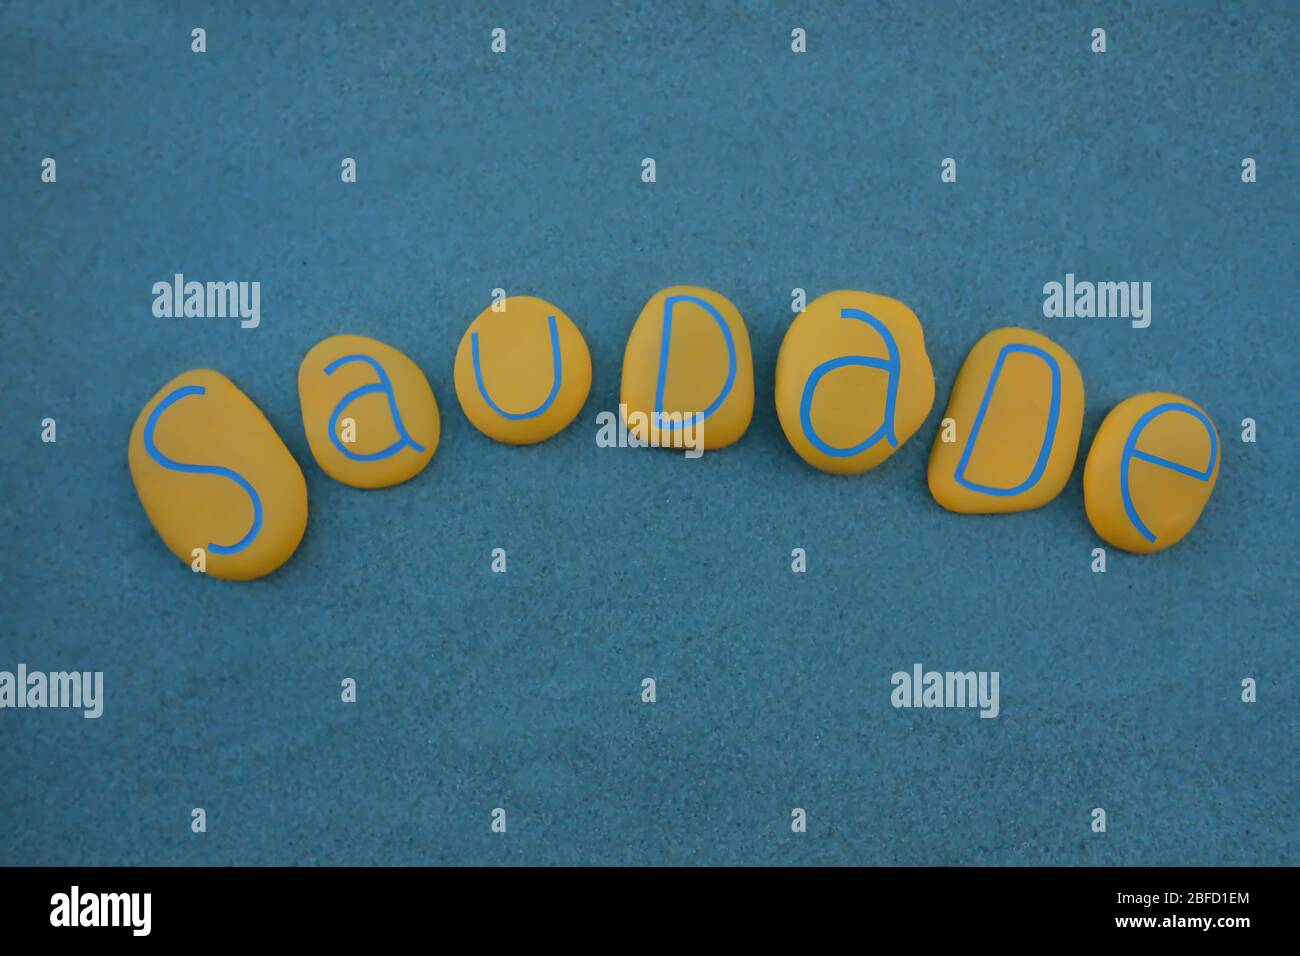 Saudade, Portuguese word meaning nostalgia or longing composed with yellow colored stone letters over green sand Stock Photo